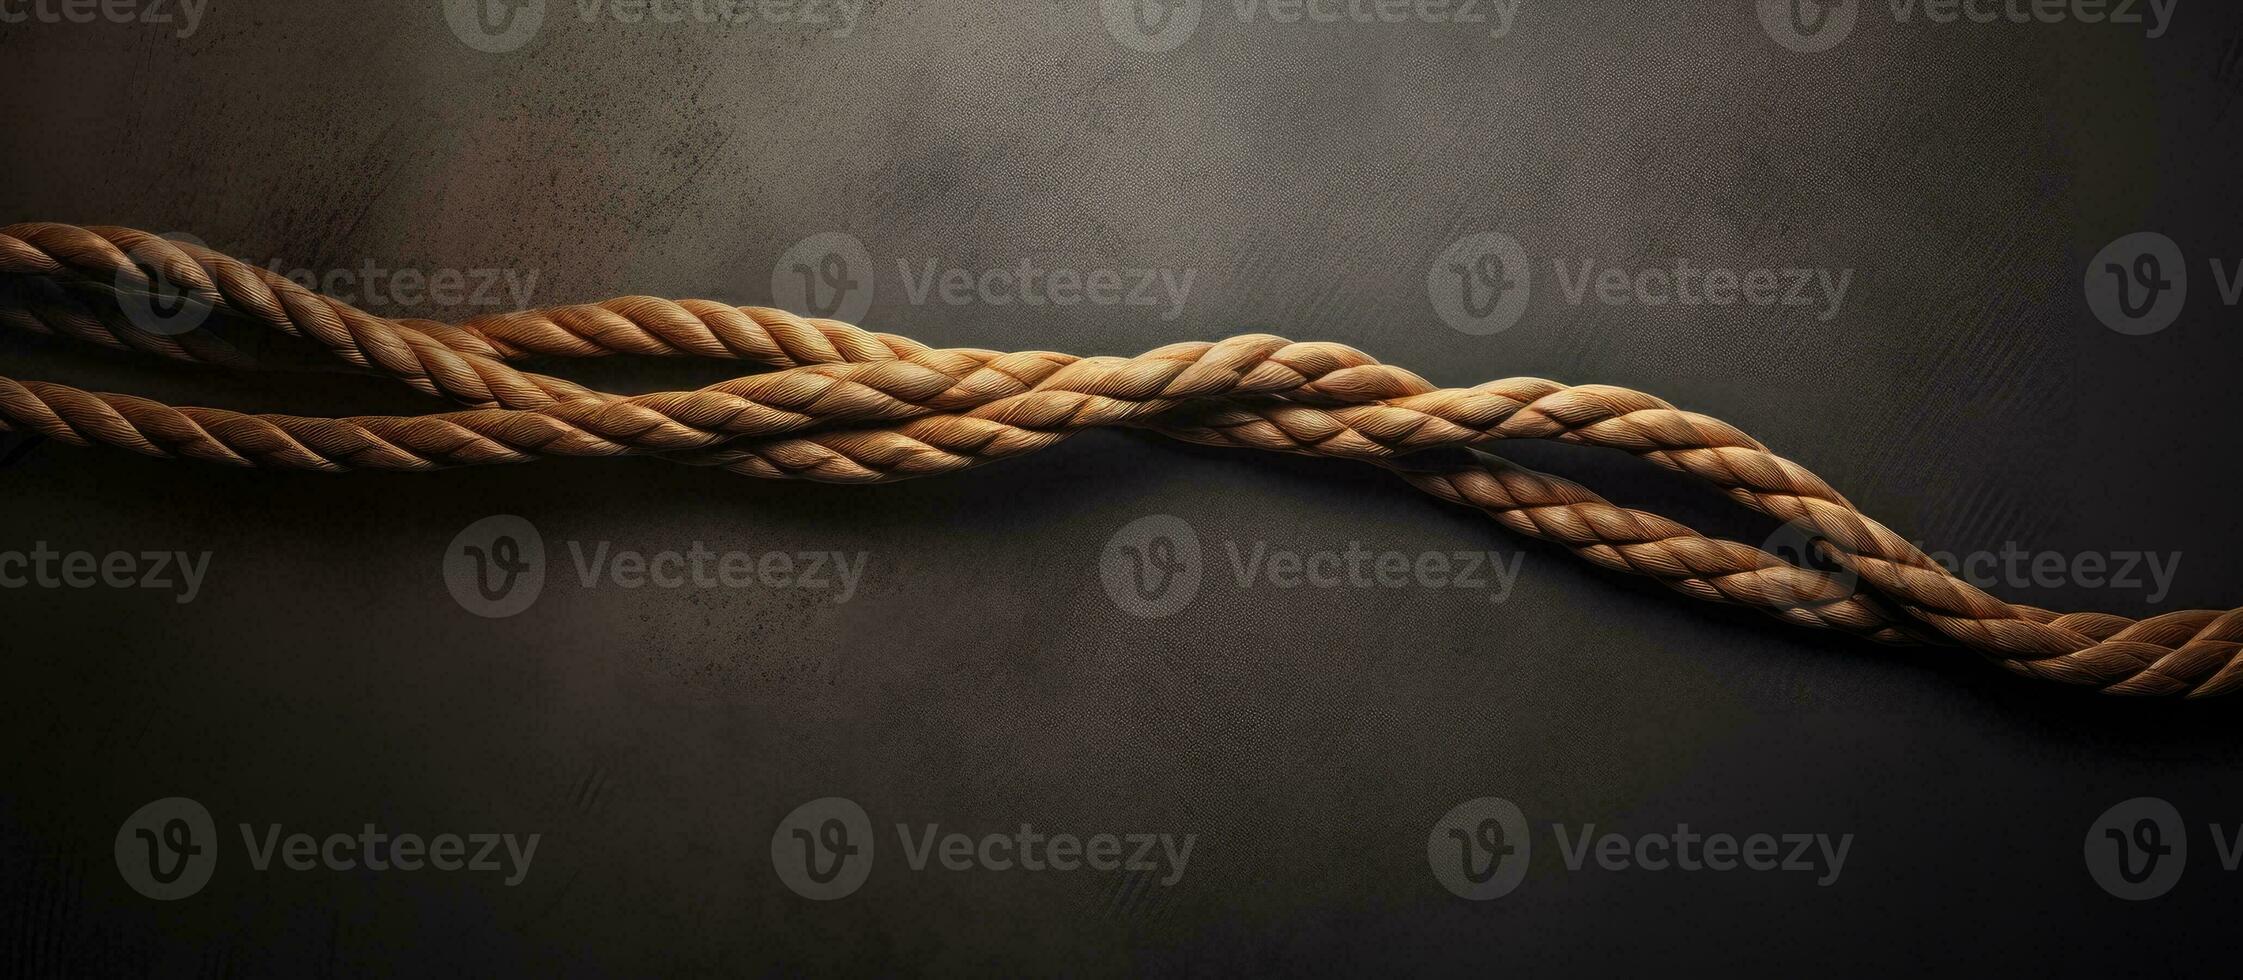 Photo of a detailed close up of a rope hanging on a textured wall with copy space